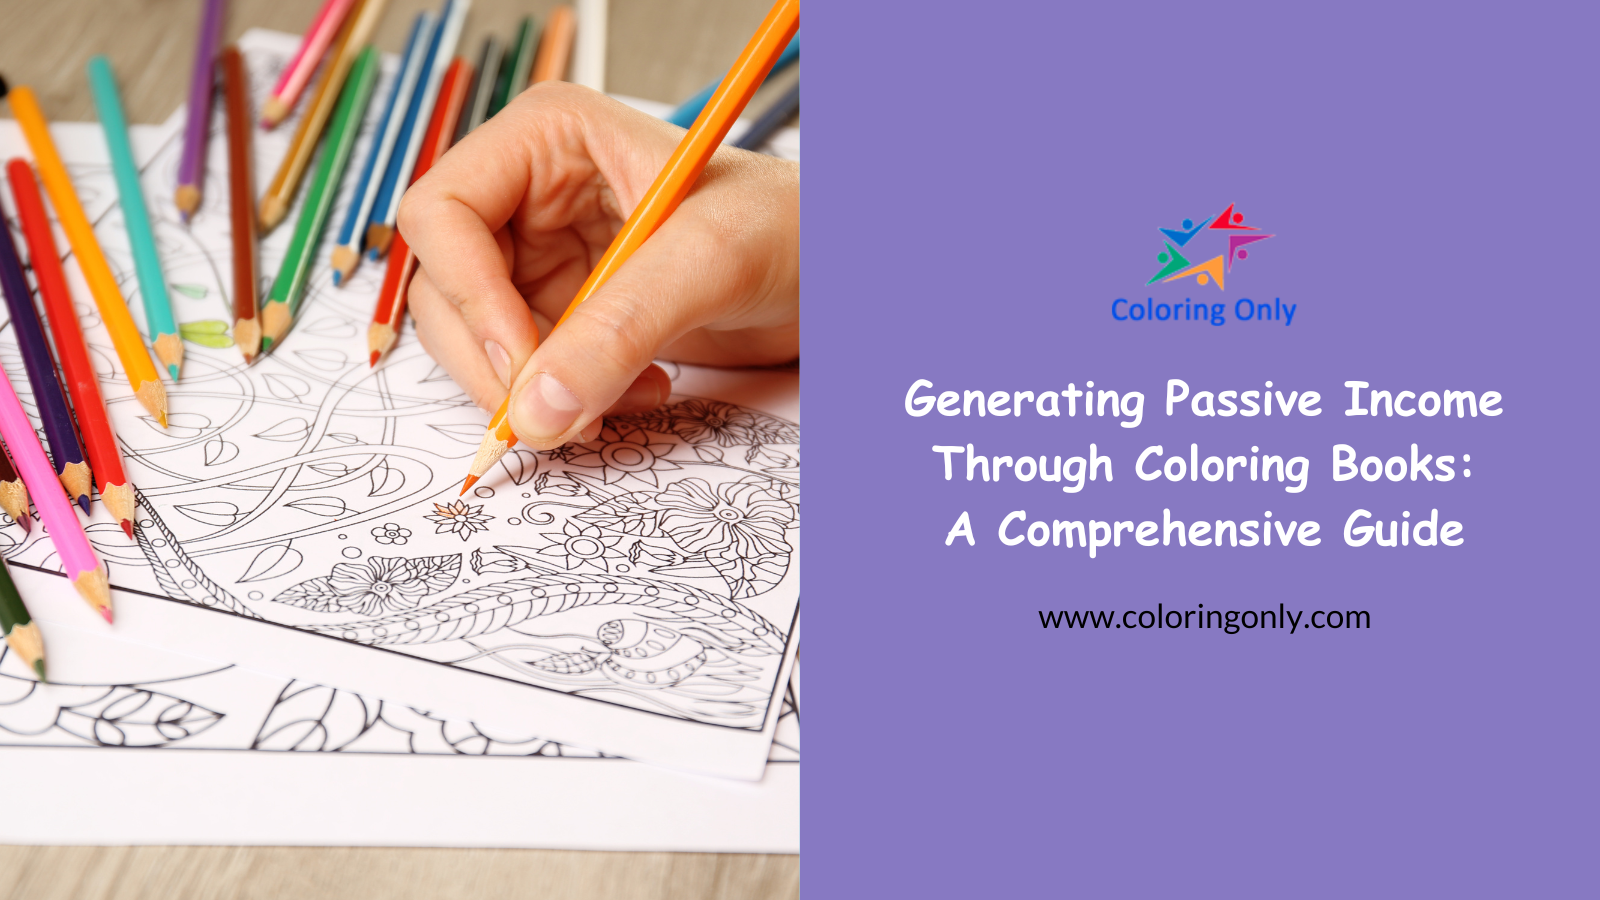 Generating Passive Income Through Coloring Books: A Comprehensive Guide